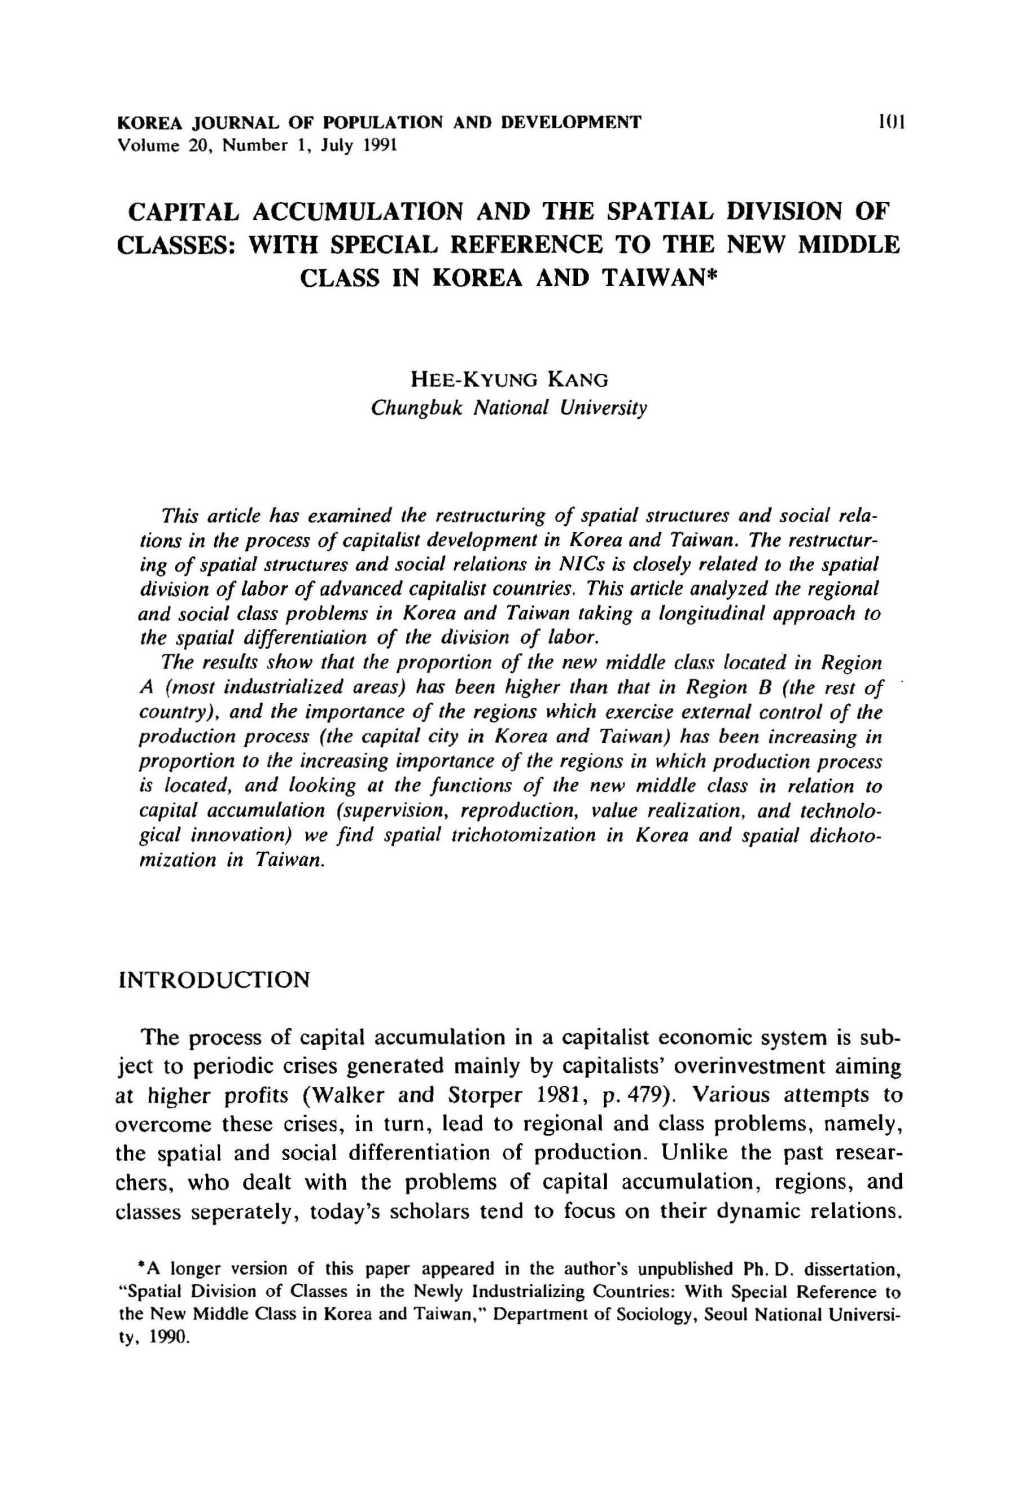 Capital Accumulation and the Spatial Division of Classes: with Special Reference to the New Middle Class in Korea and Taiwan*